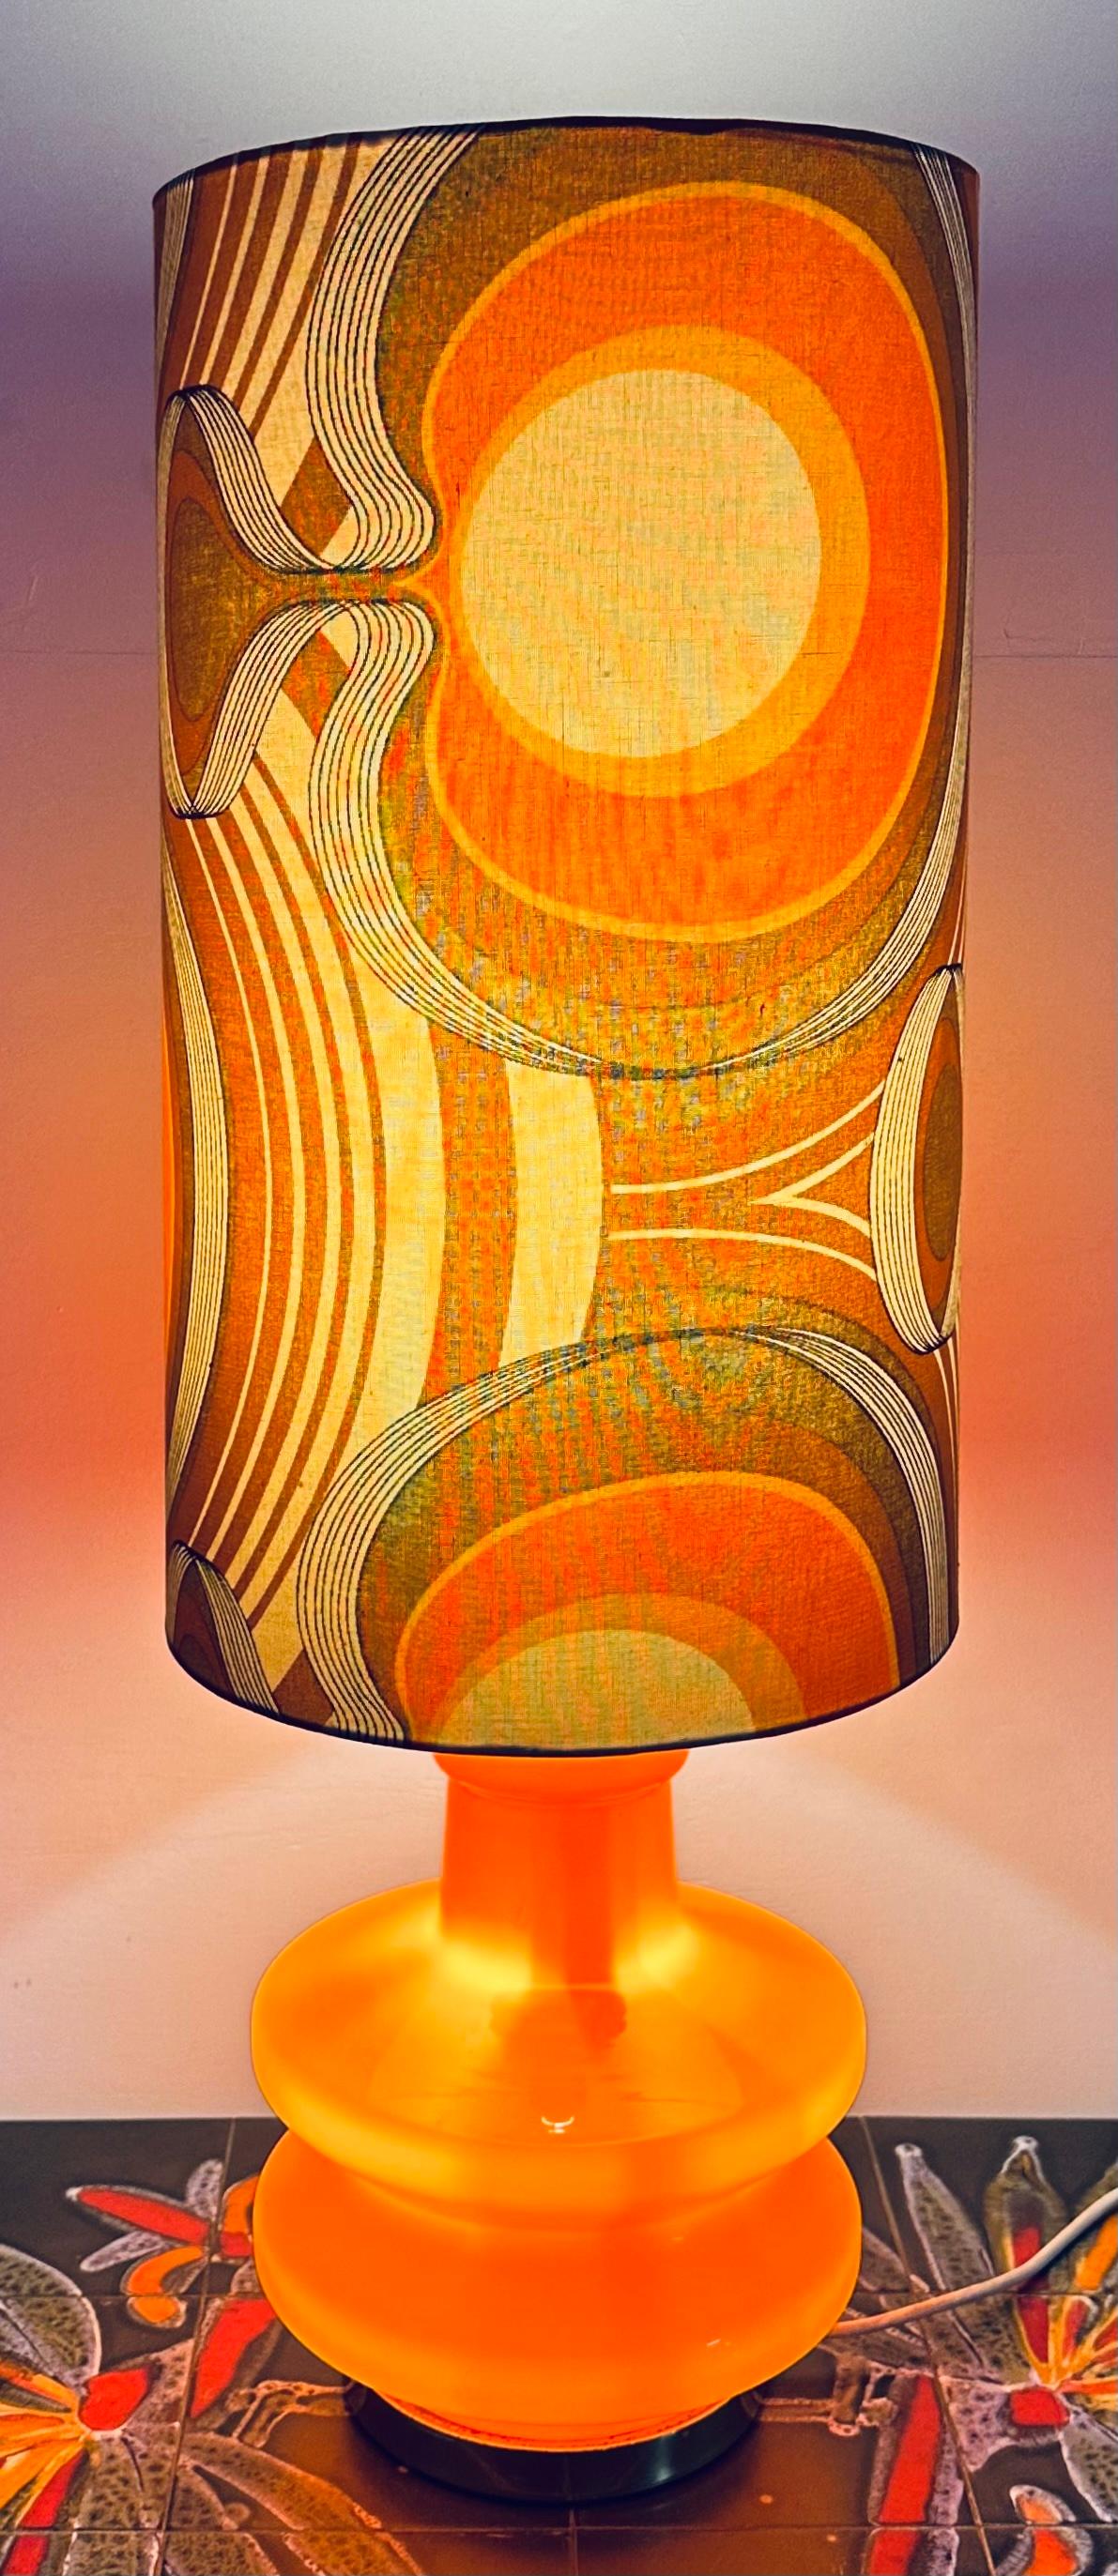 1970s German space-age and futuristic illuminated orange glass table lamp.  The illuminated orange base with feature brass fittings requires a single E14 screw-in bulb inside.  This is accessed by unscrewing the brass screw below the lightbulb